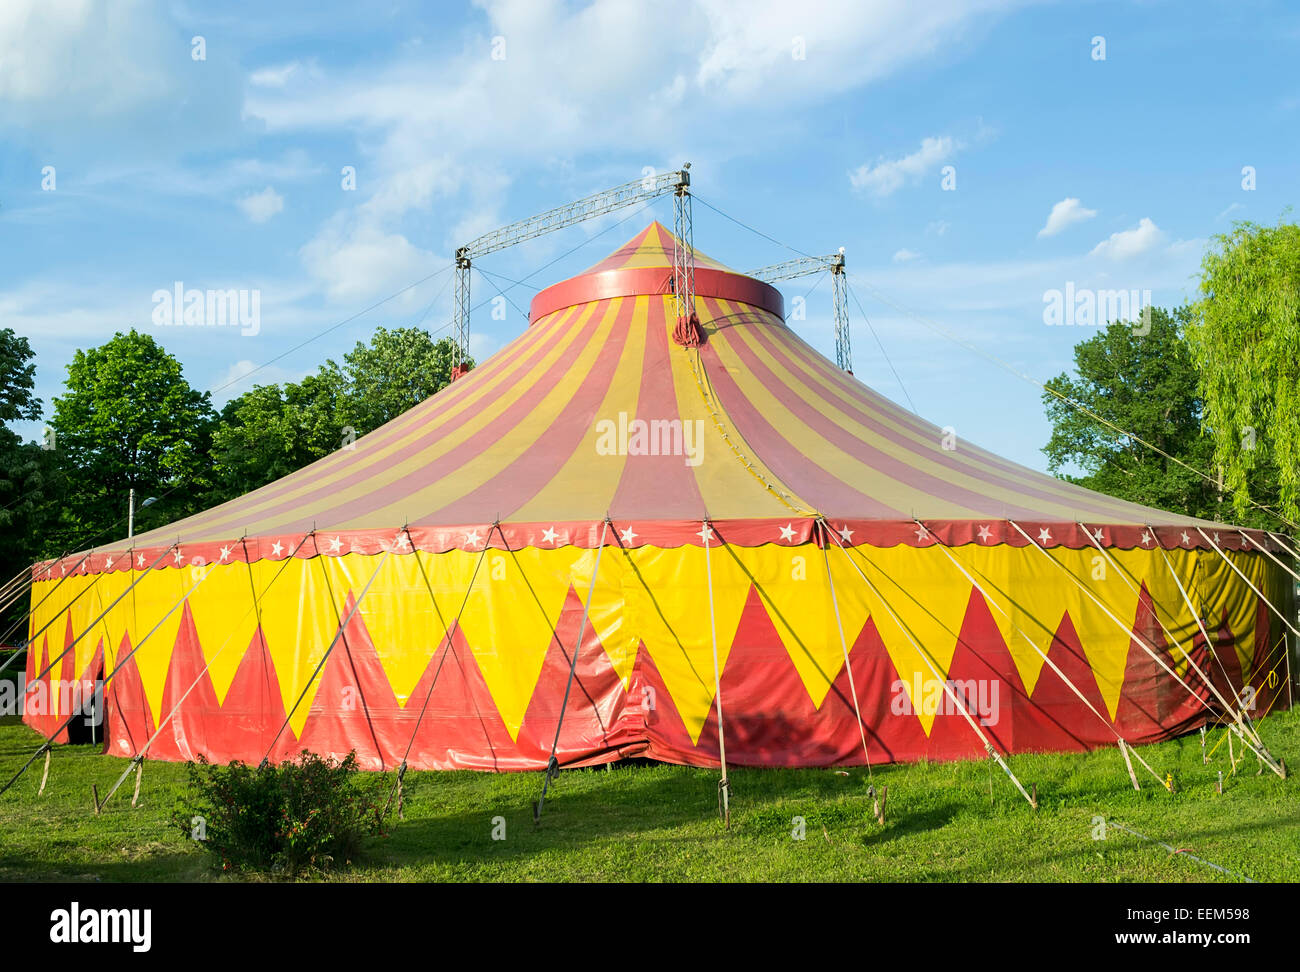 Circus tent in red and yellow colors installed for representations in a park Stock Photo